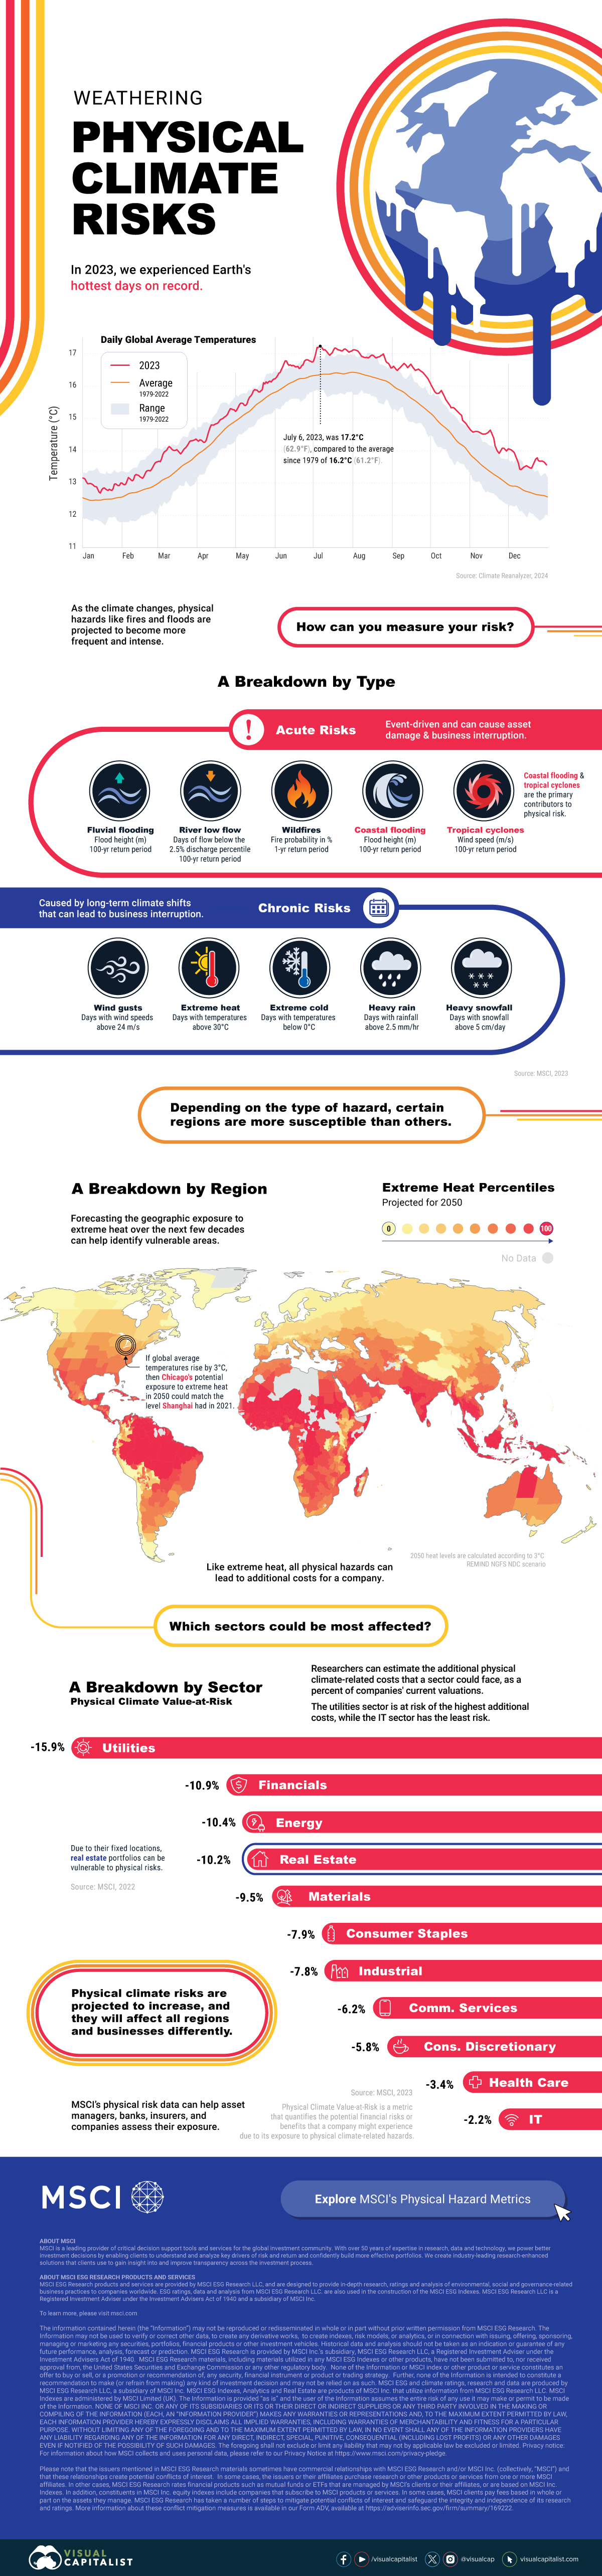 A long infographic describing the types of climate risks. It shows that areas near the equator are projected to see high exposure to extreme heat in 2050, and that the utilities sector is the most exposed to climate risks.